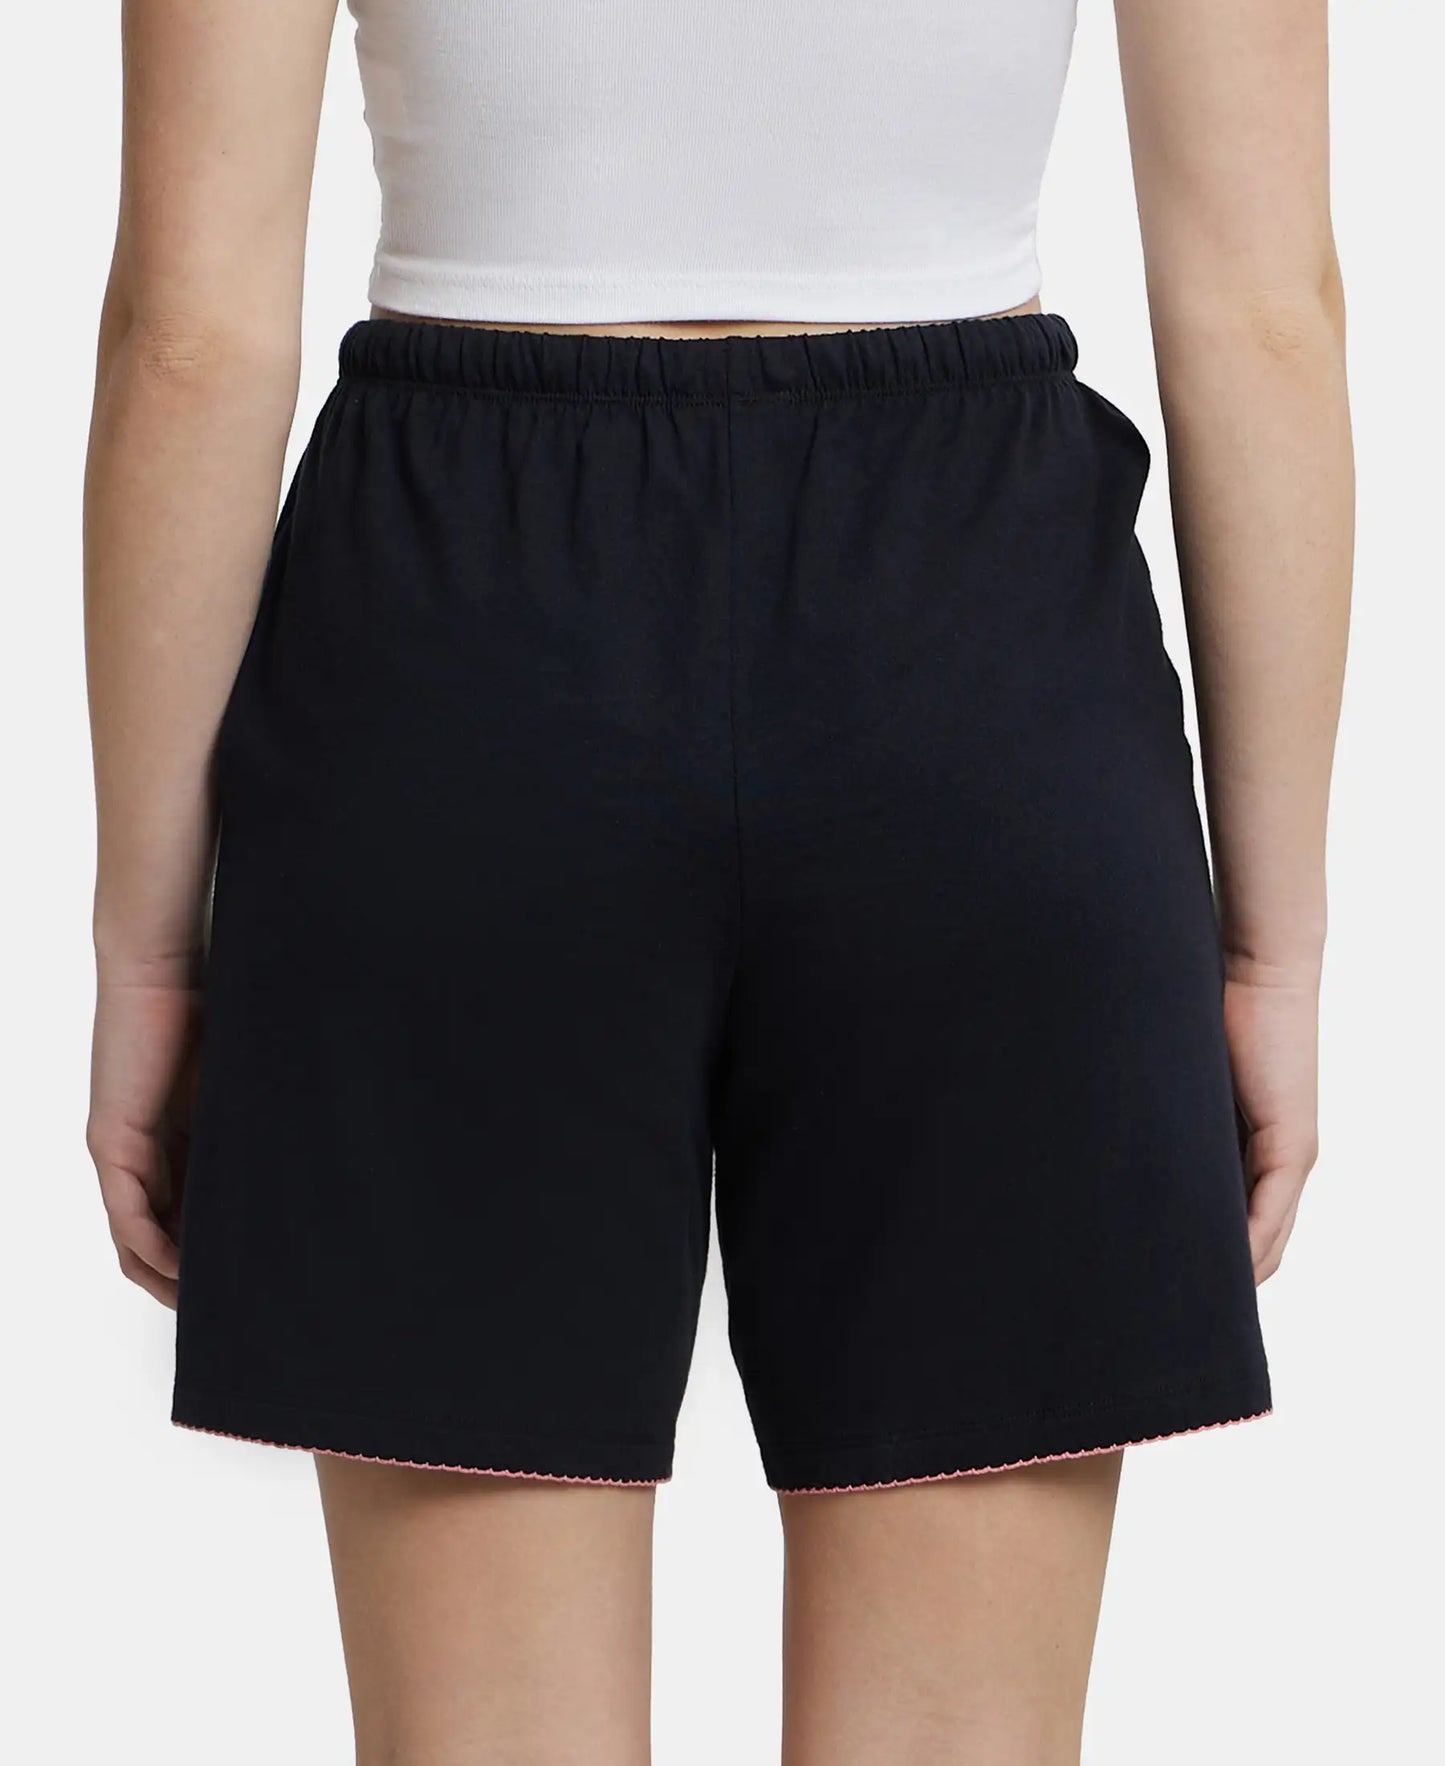 Super Combed Cotton Relaxed Fit Sleep Shorts with Convenient Side Pockets - Black-3